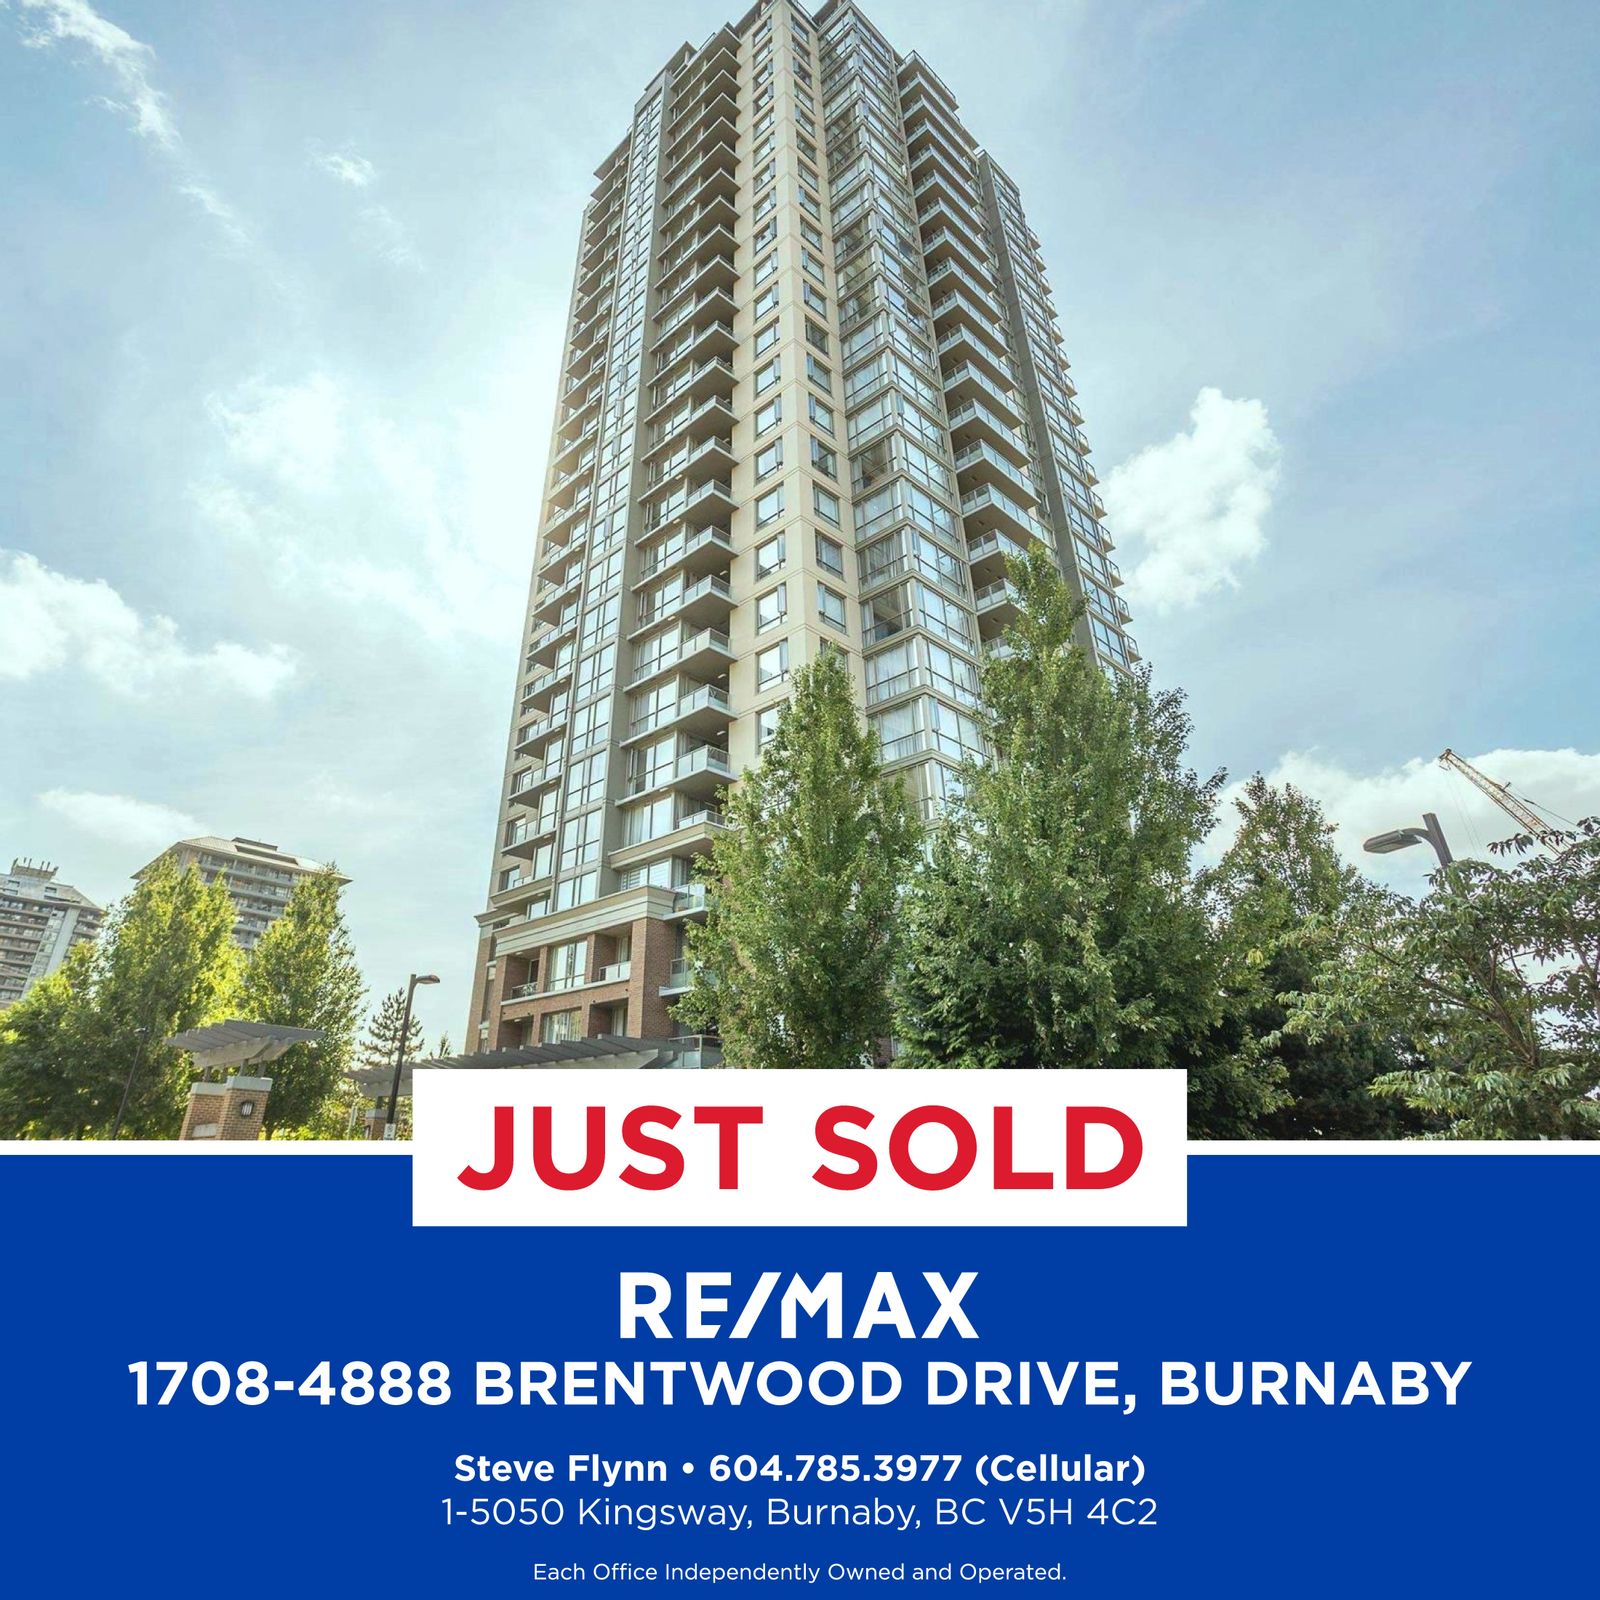 JUST SOLD: 1708-4888 Brentwood Drive, Burnaby